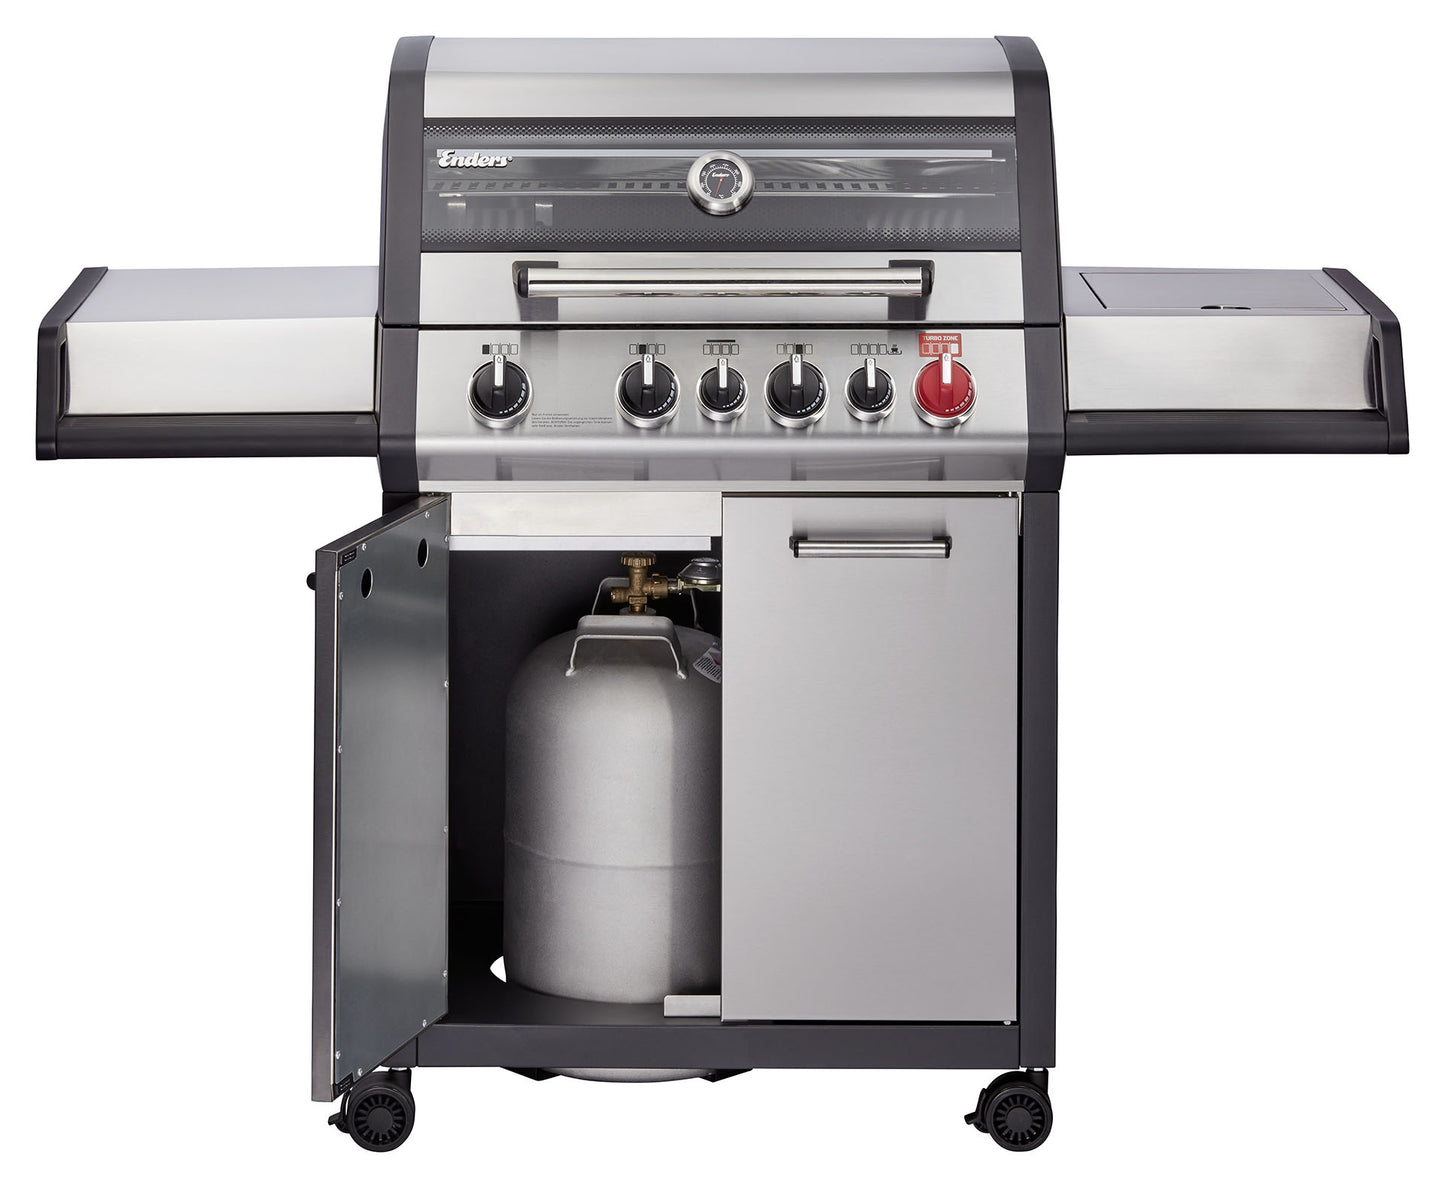 enders monroe pro 4 sik turbo gas barbecue